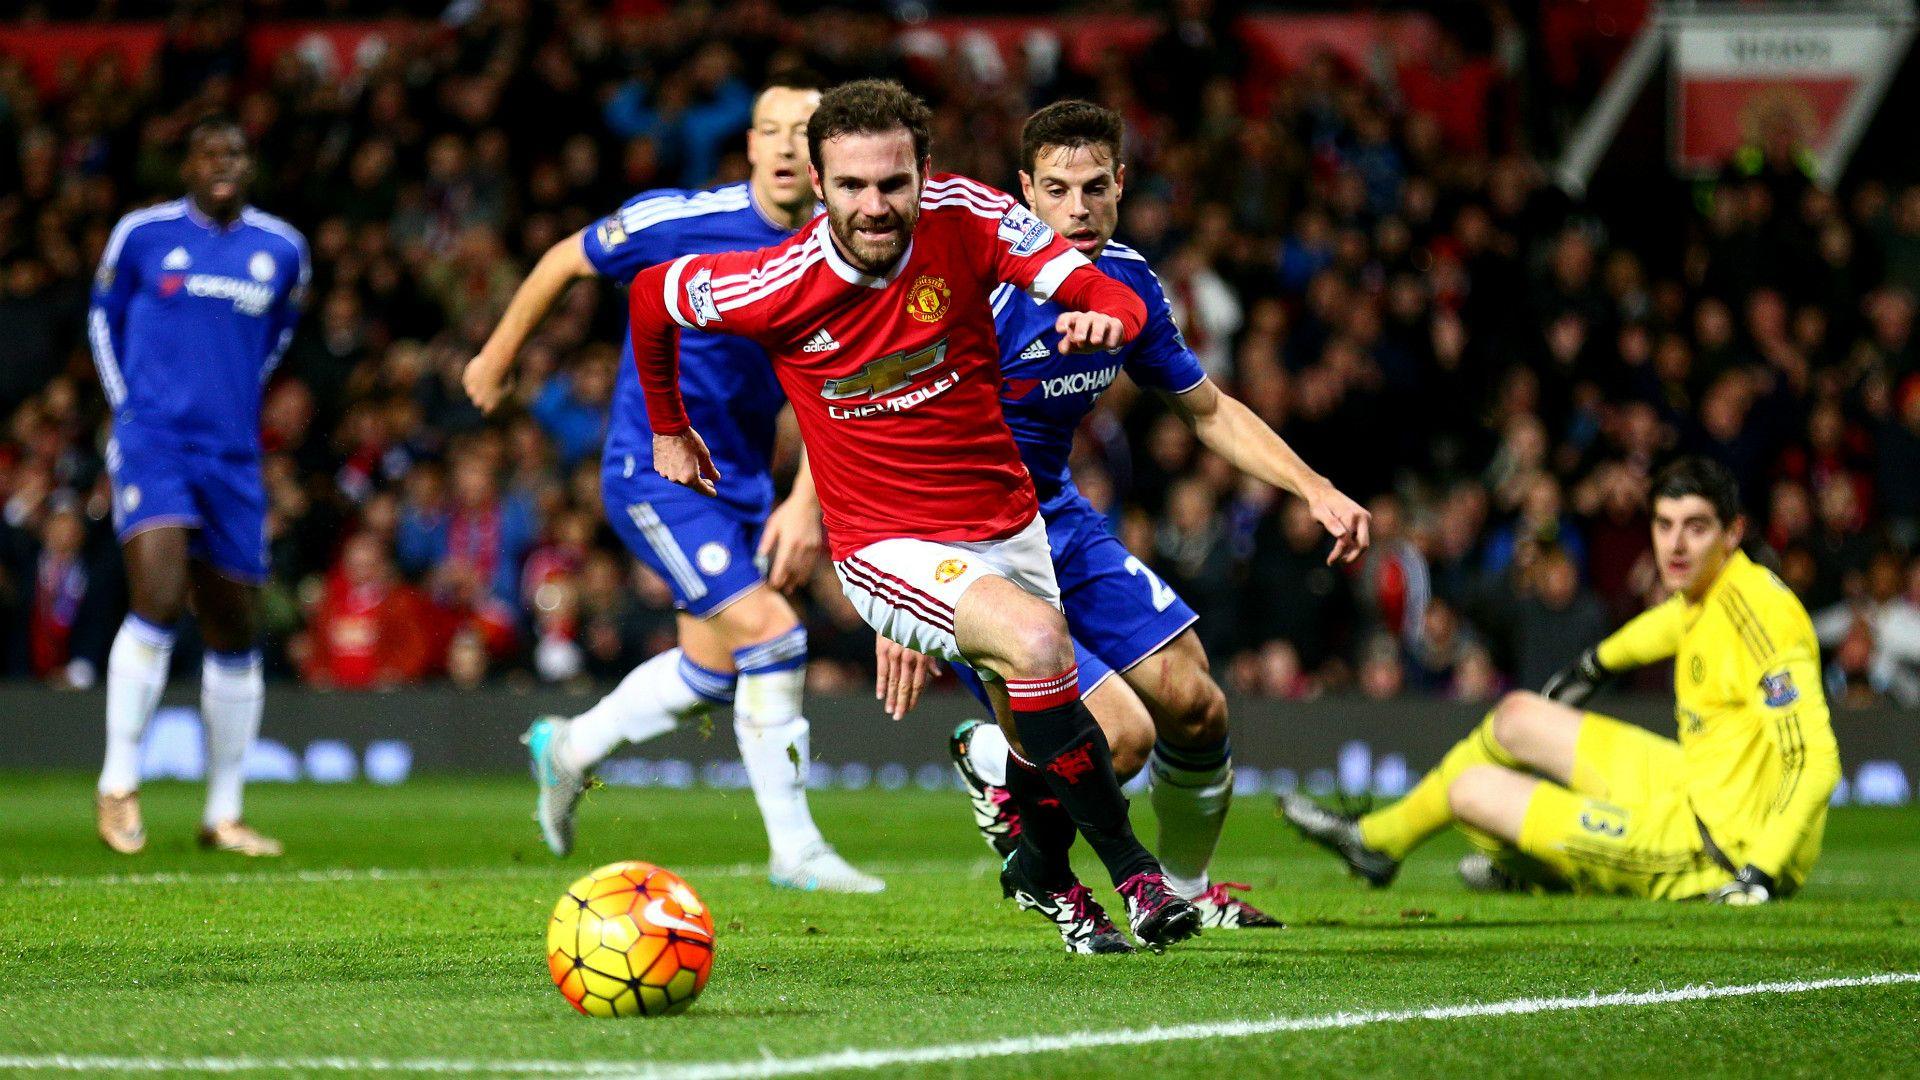 GW 19: Manchester United 0 Chelsea Match Report 12 15